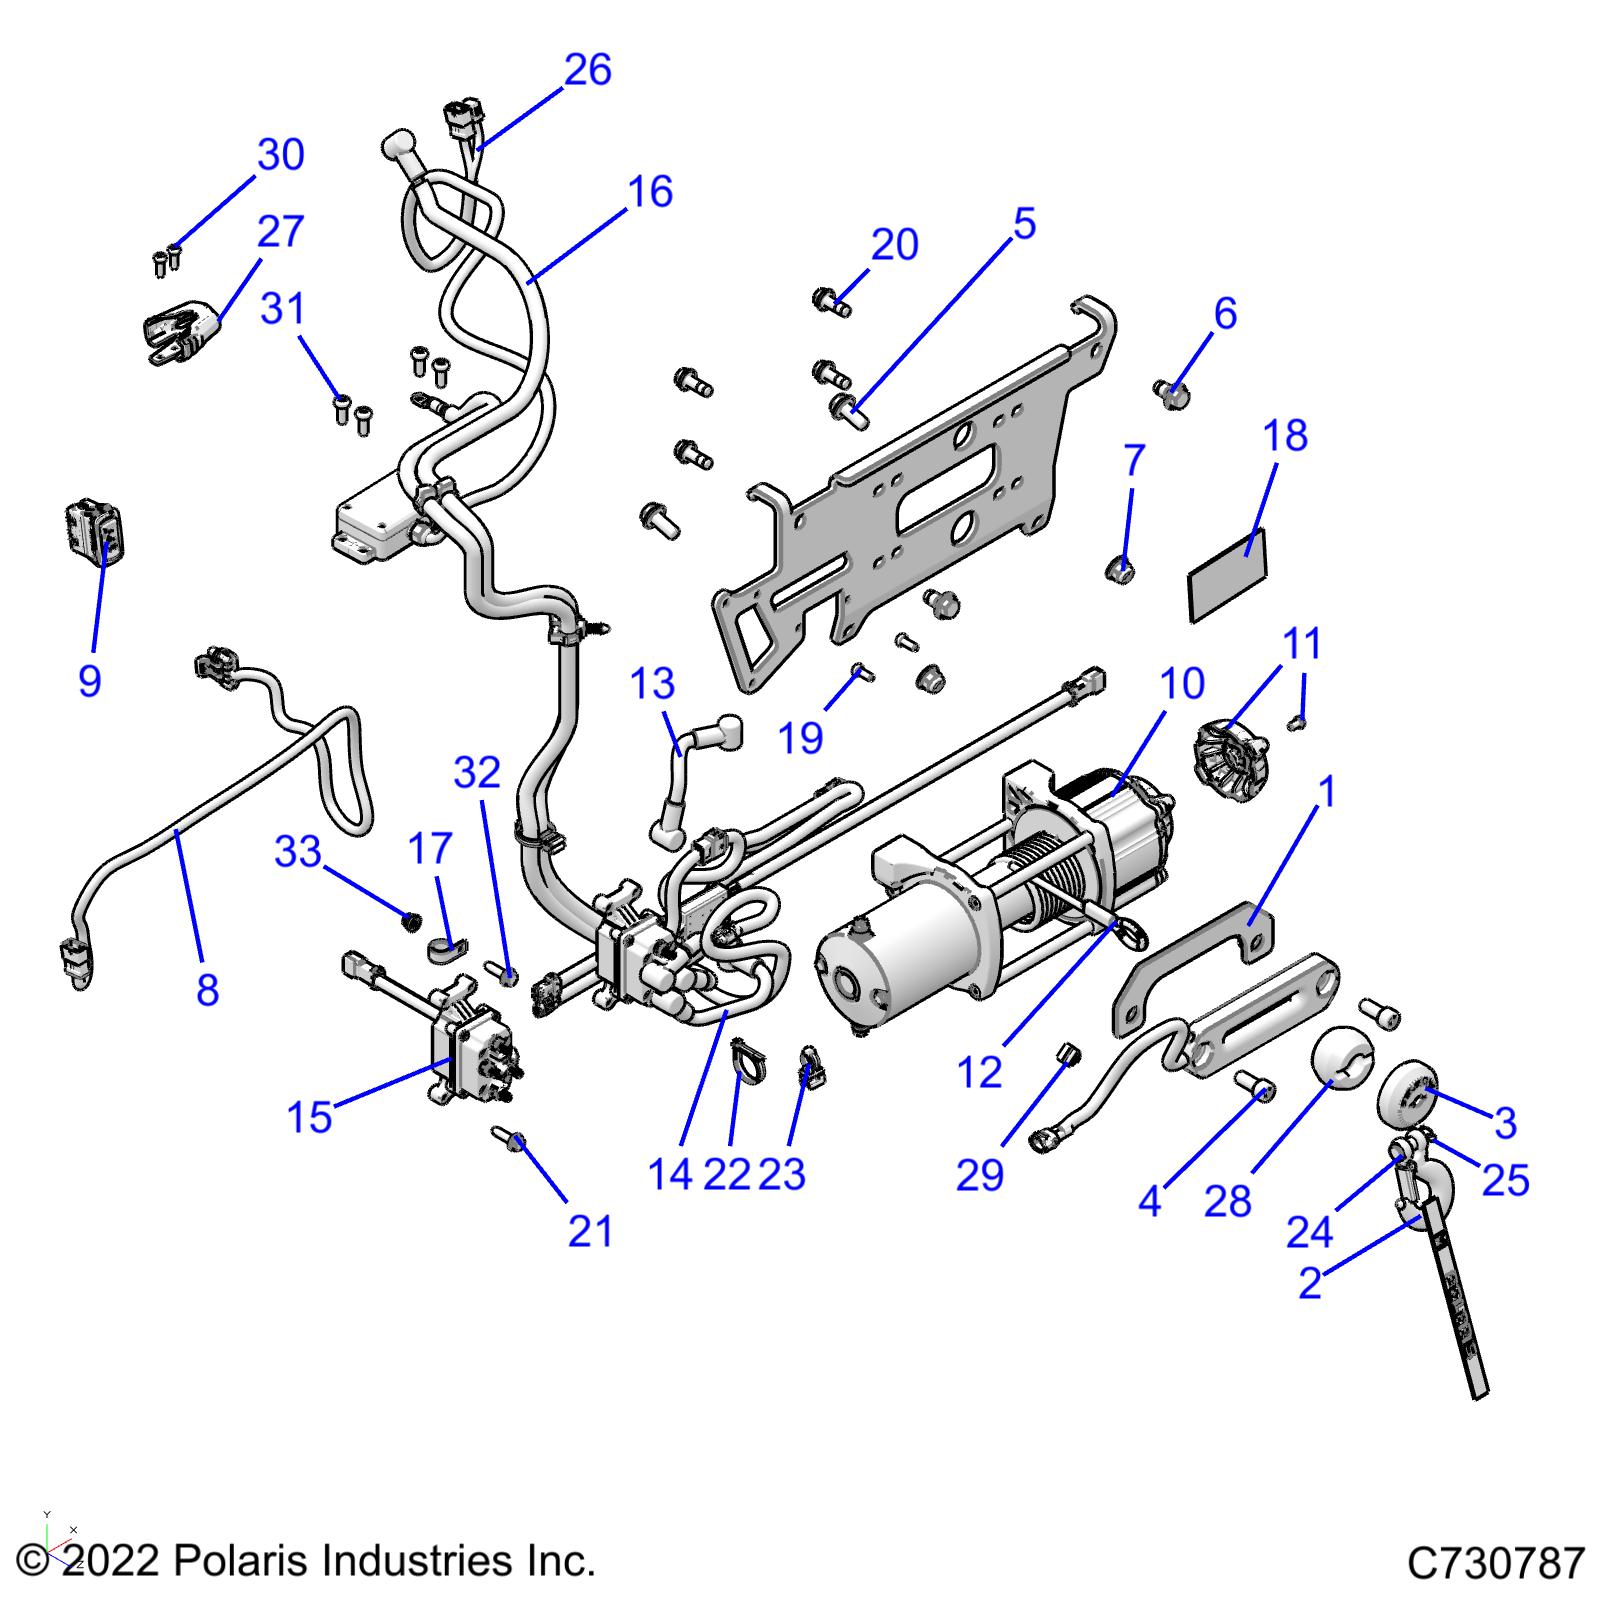 Part Number : 4080274-03 SWITCH-WINCH